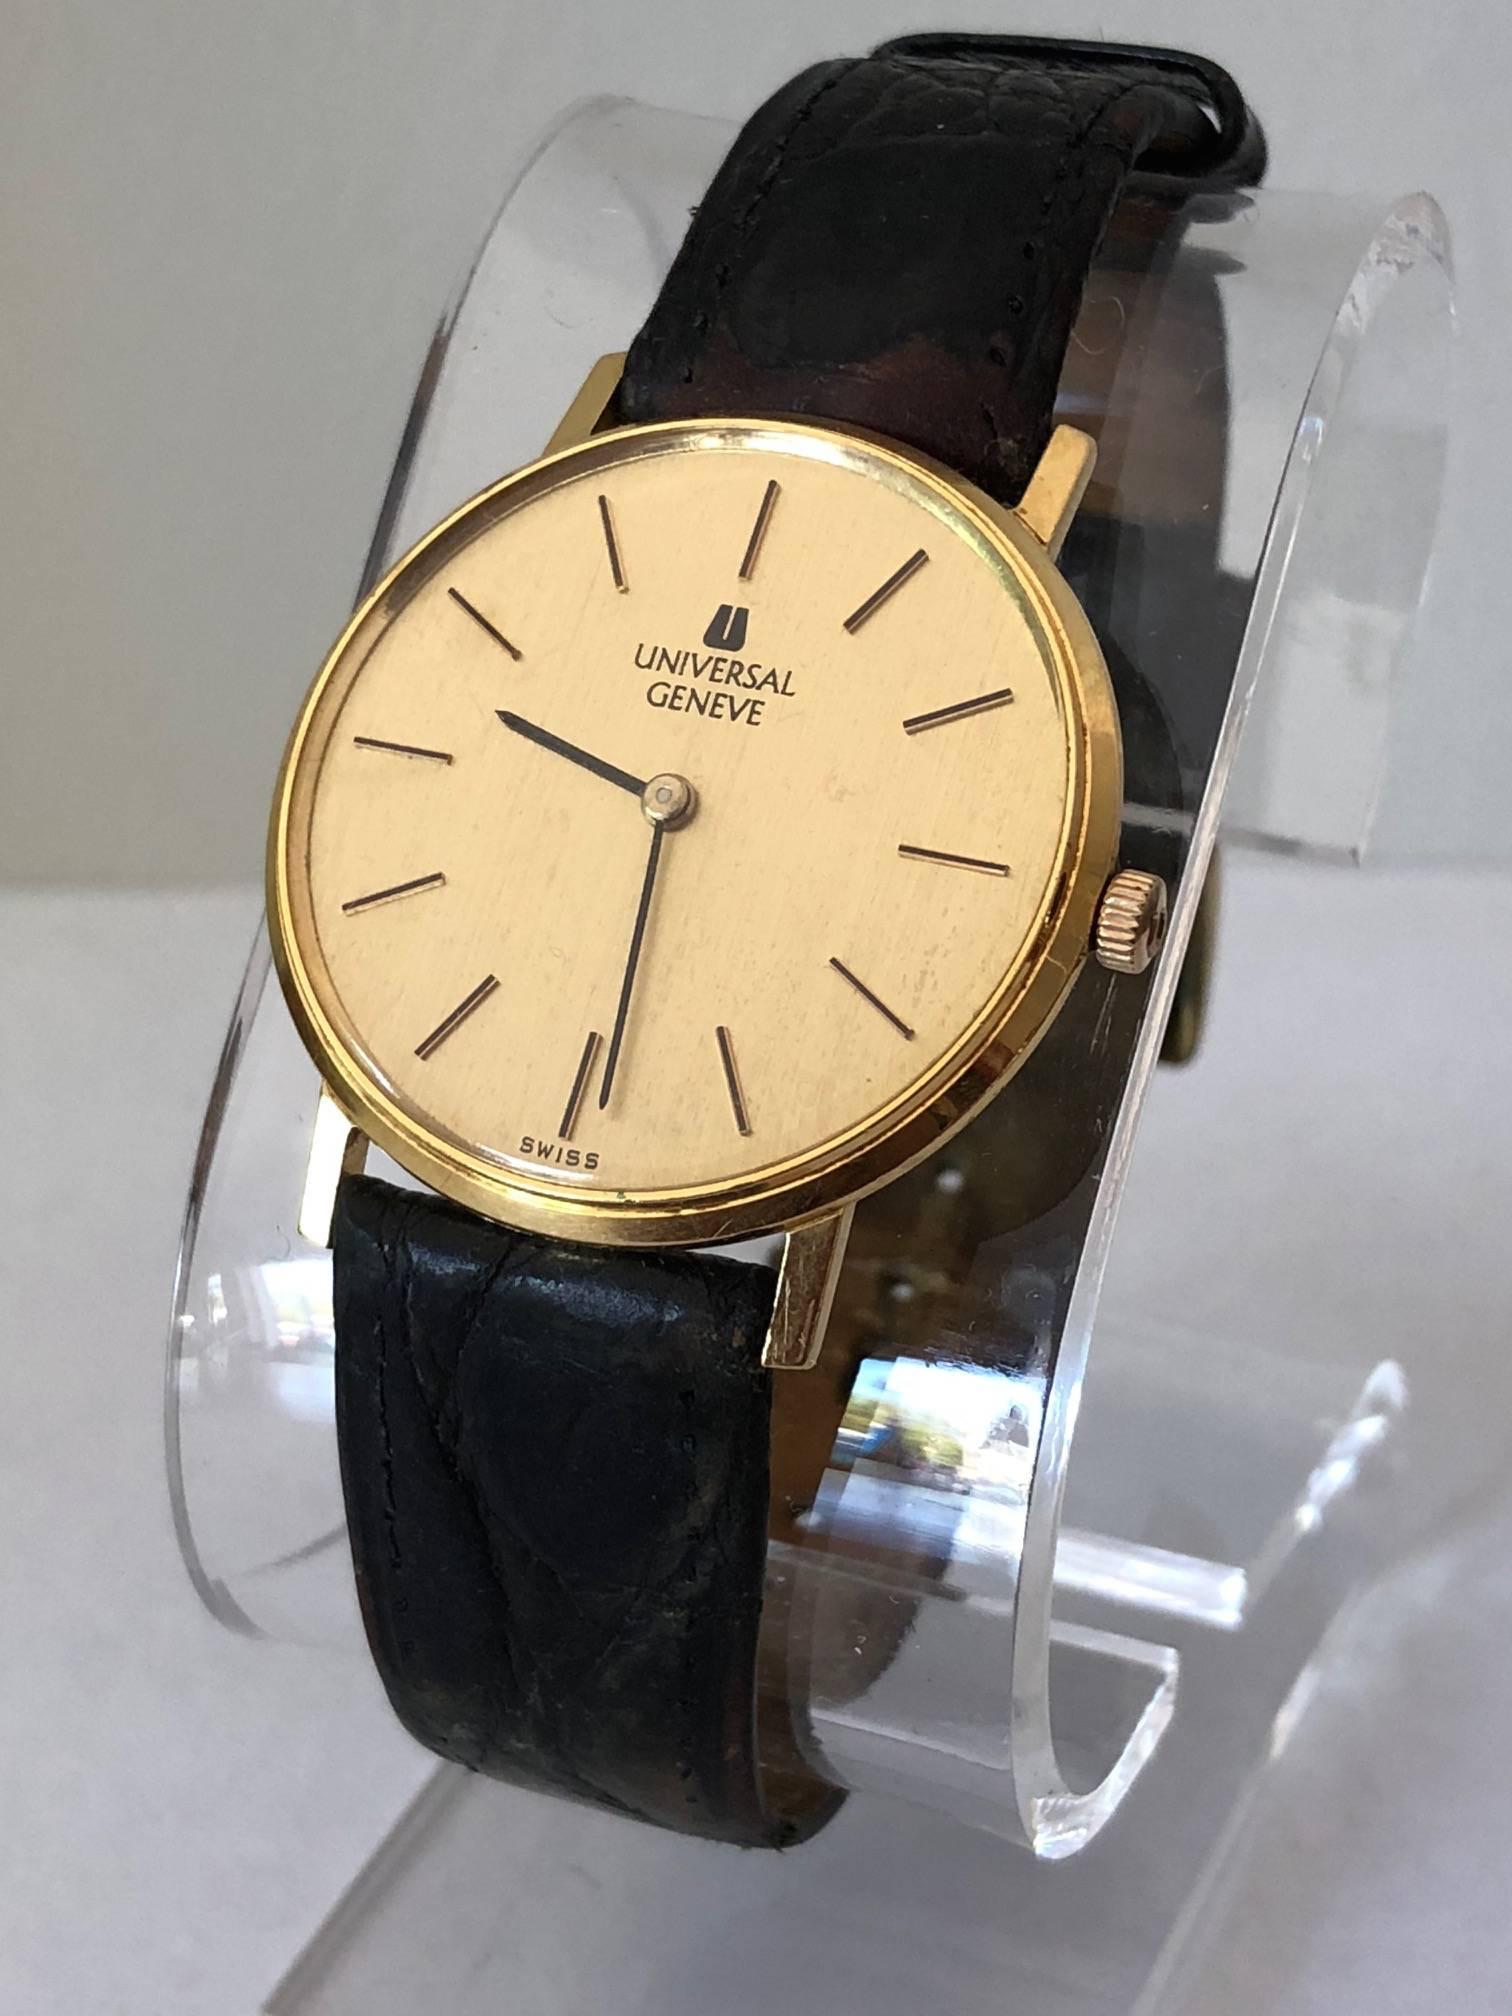 An elegant universal Geneve 18-karat gold dress watch, circa 1970s with original leather band. Measures: approximate 32 mm without crown.